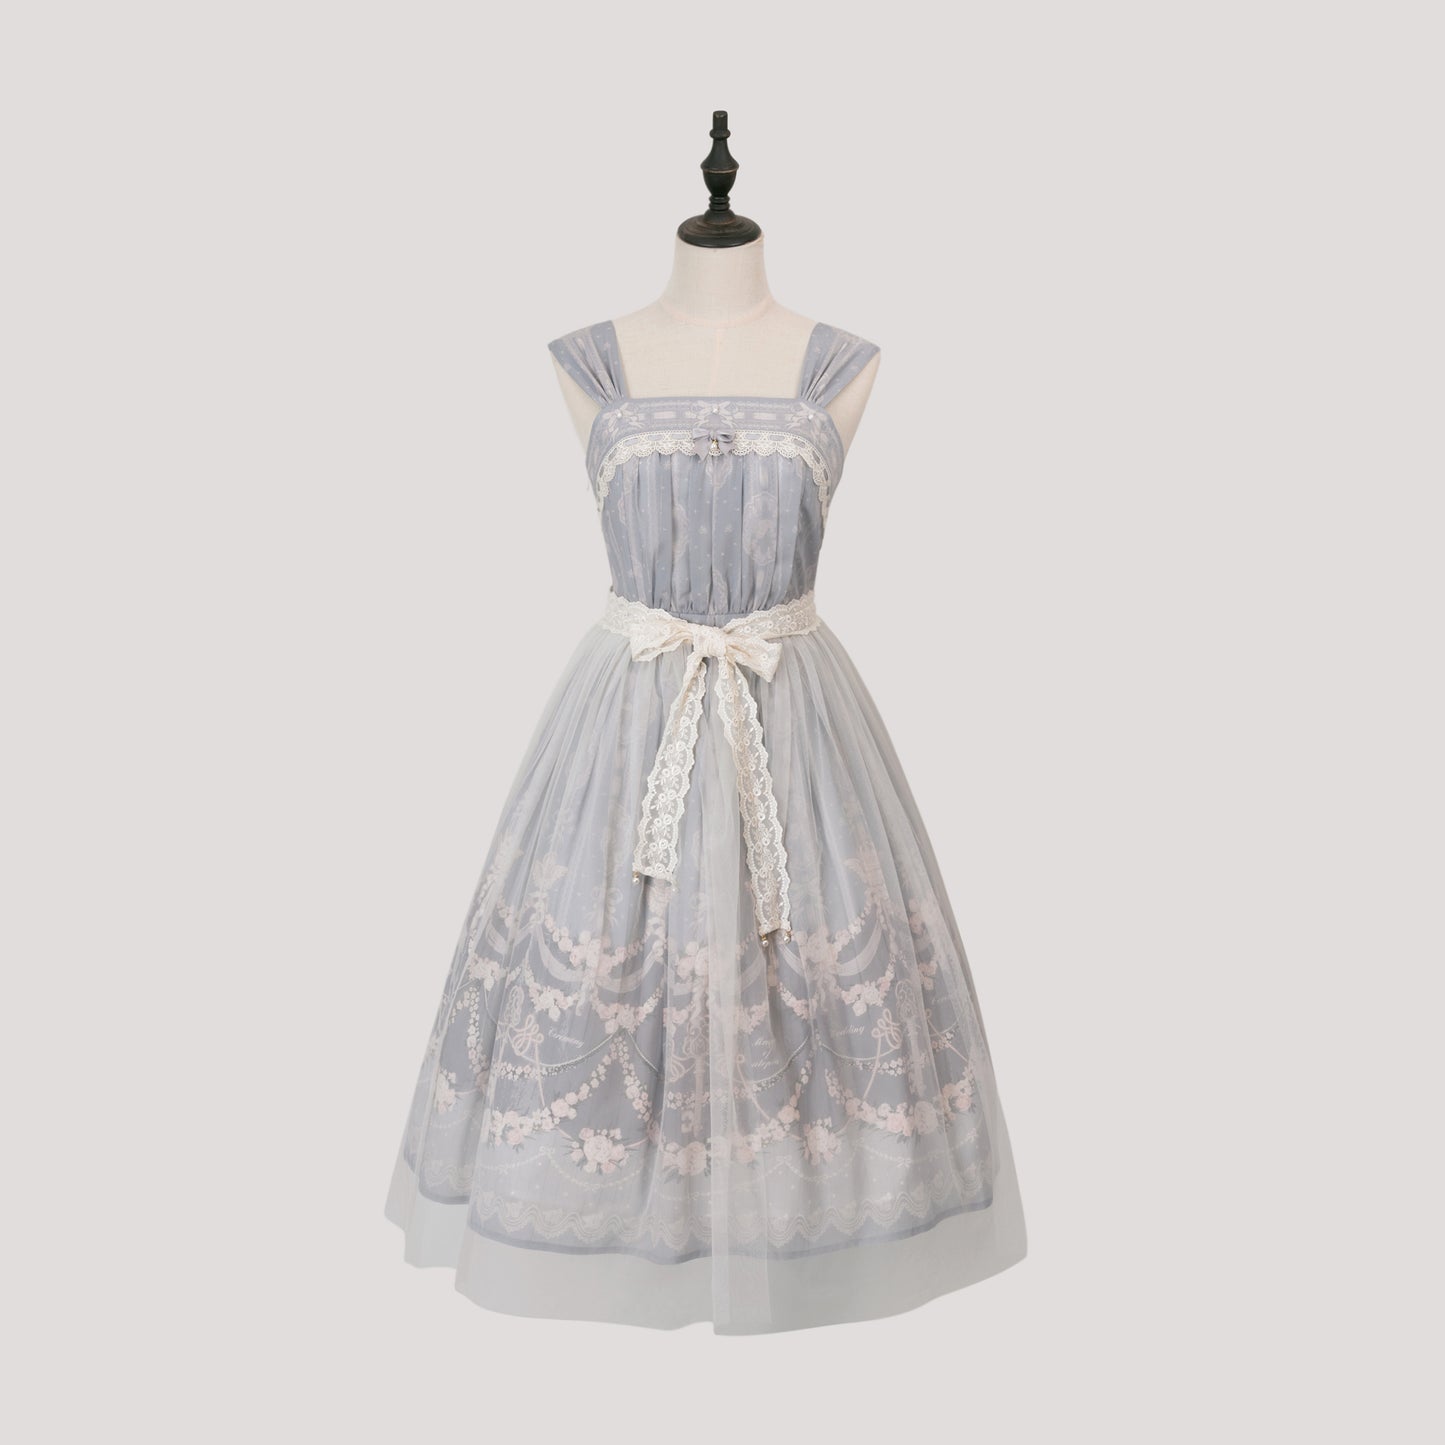 [Sale period ended] Romantic Memories Jumper skirt with veil